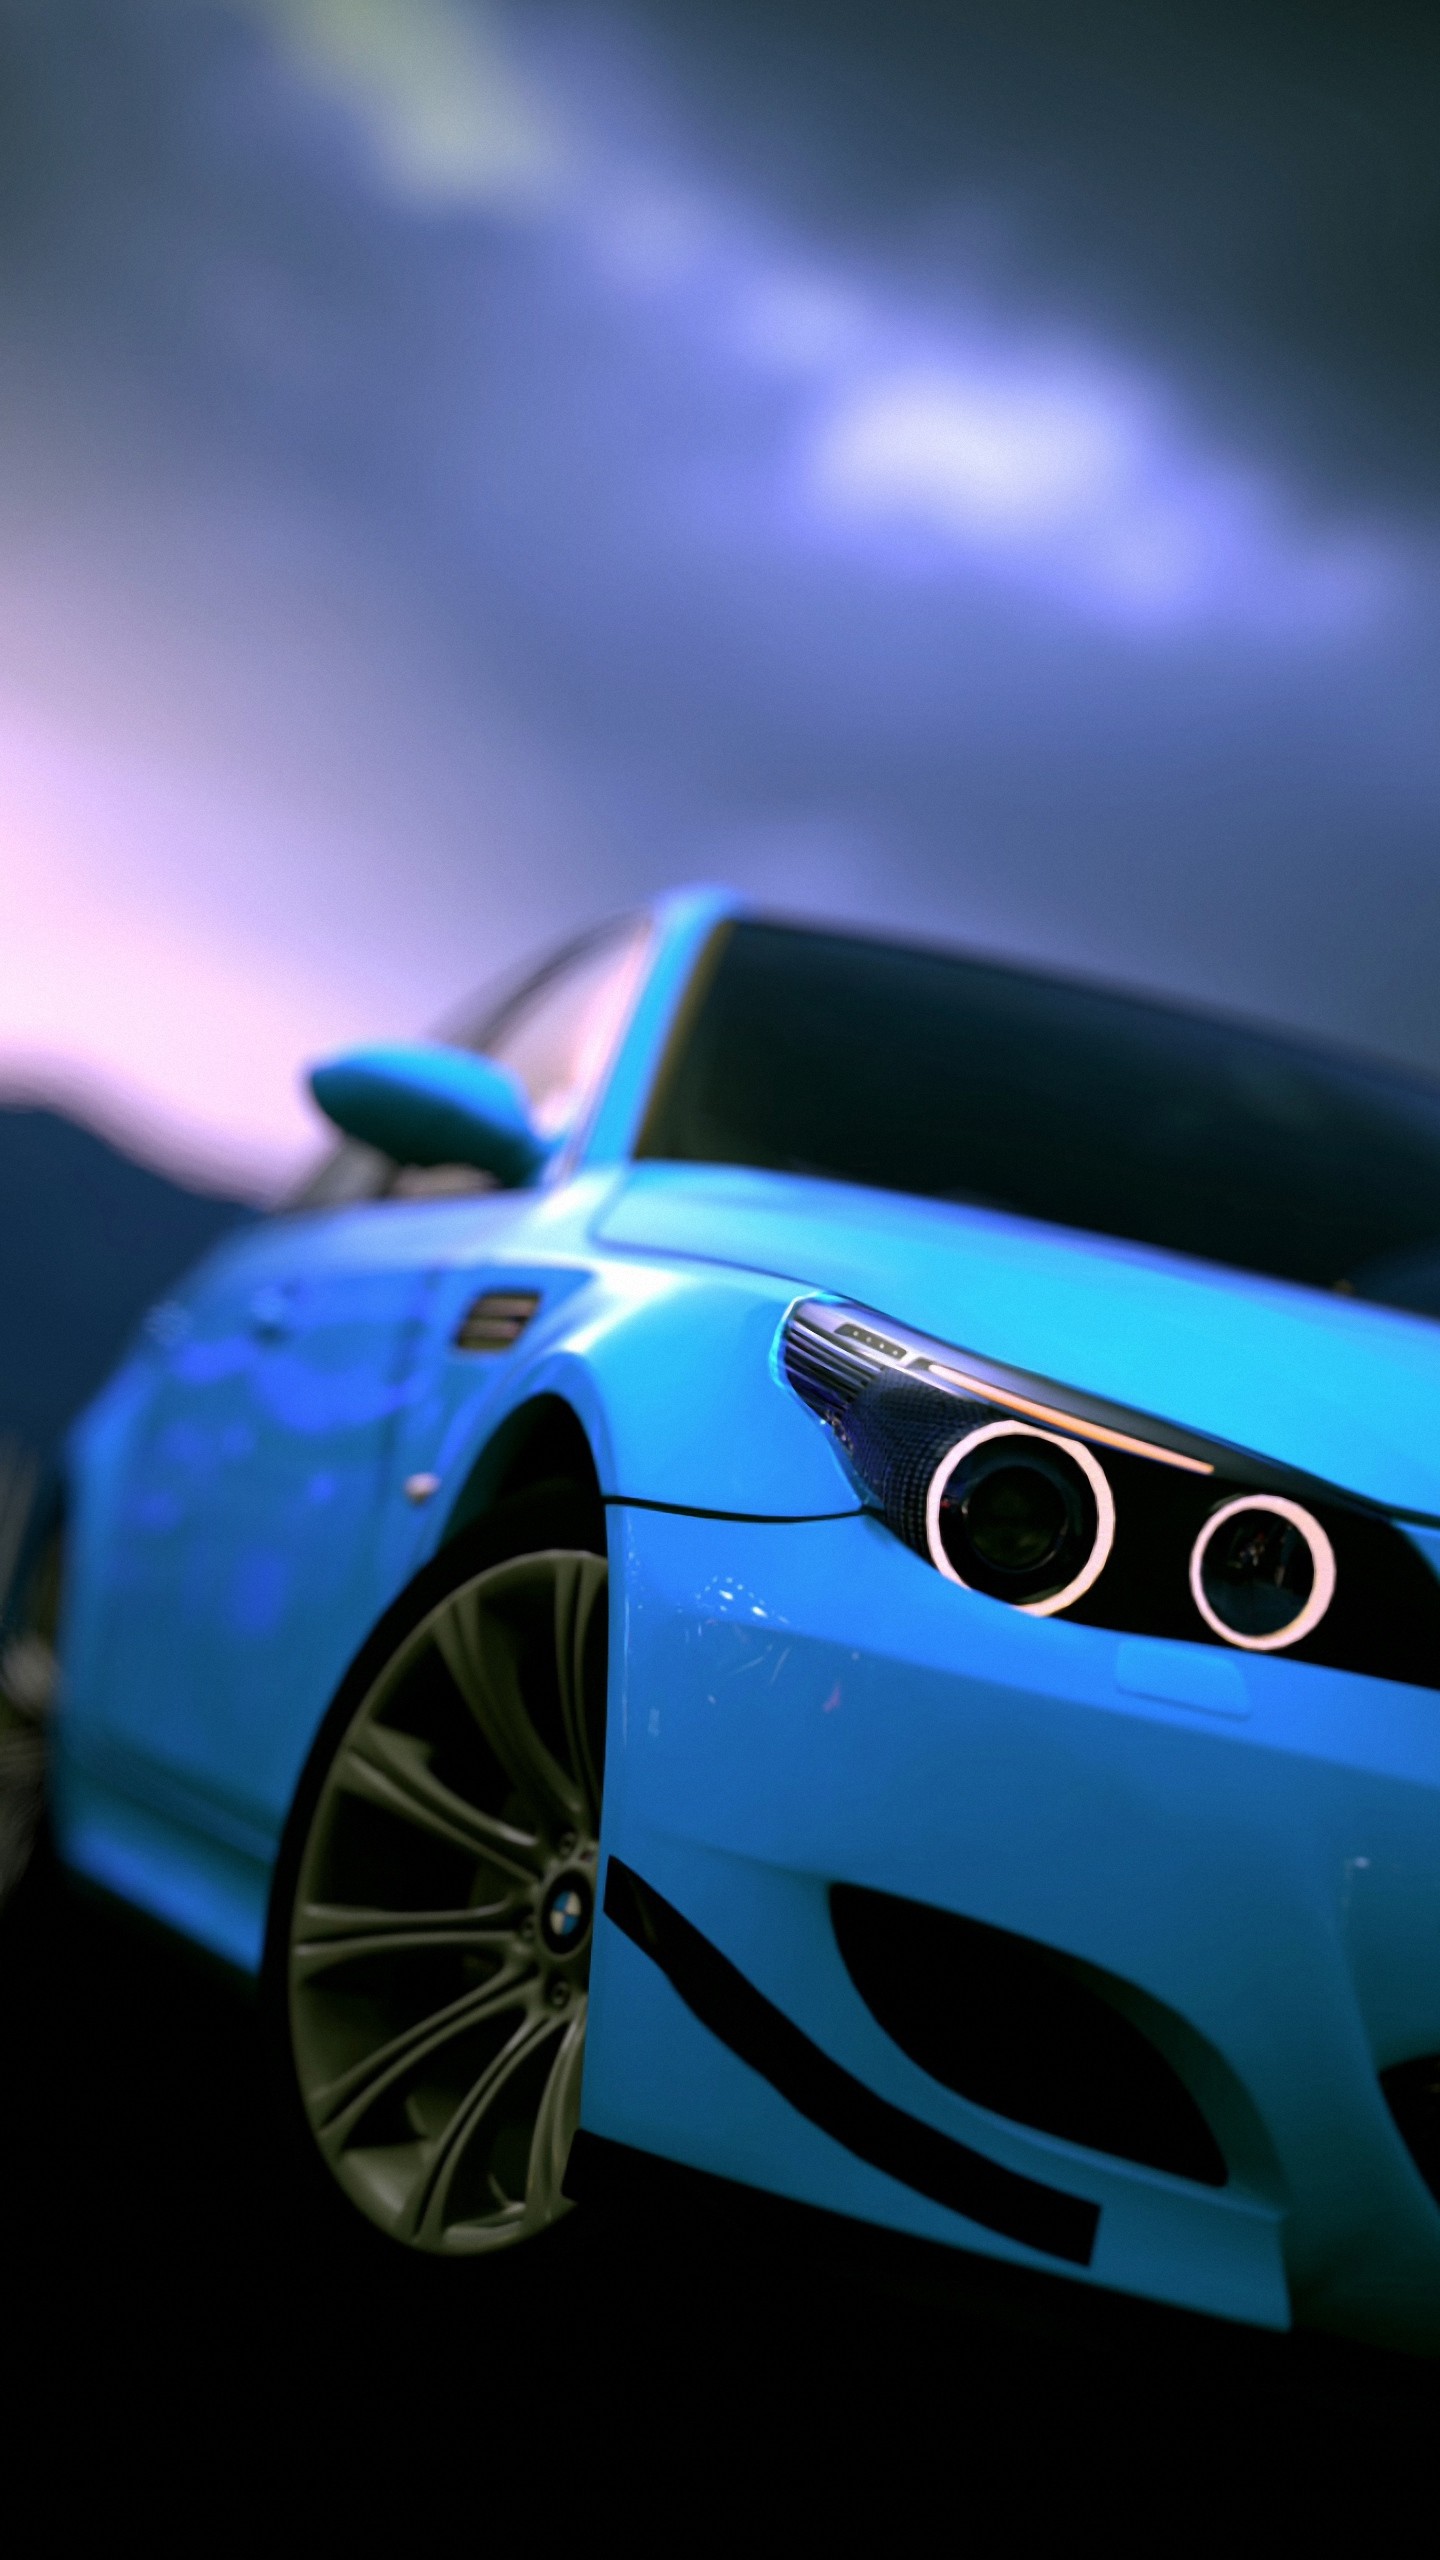 1440x2560 Baby Blue Bmw lg g3 Wallpapers HD 